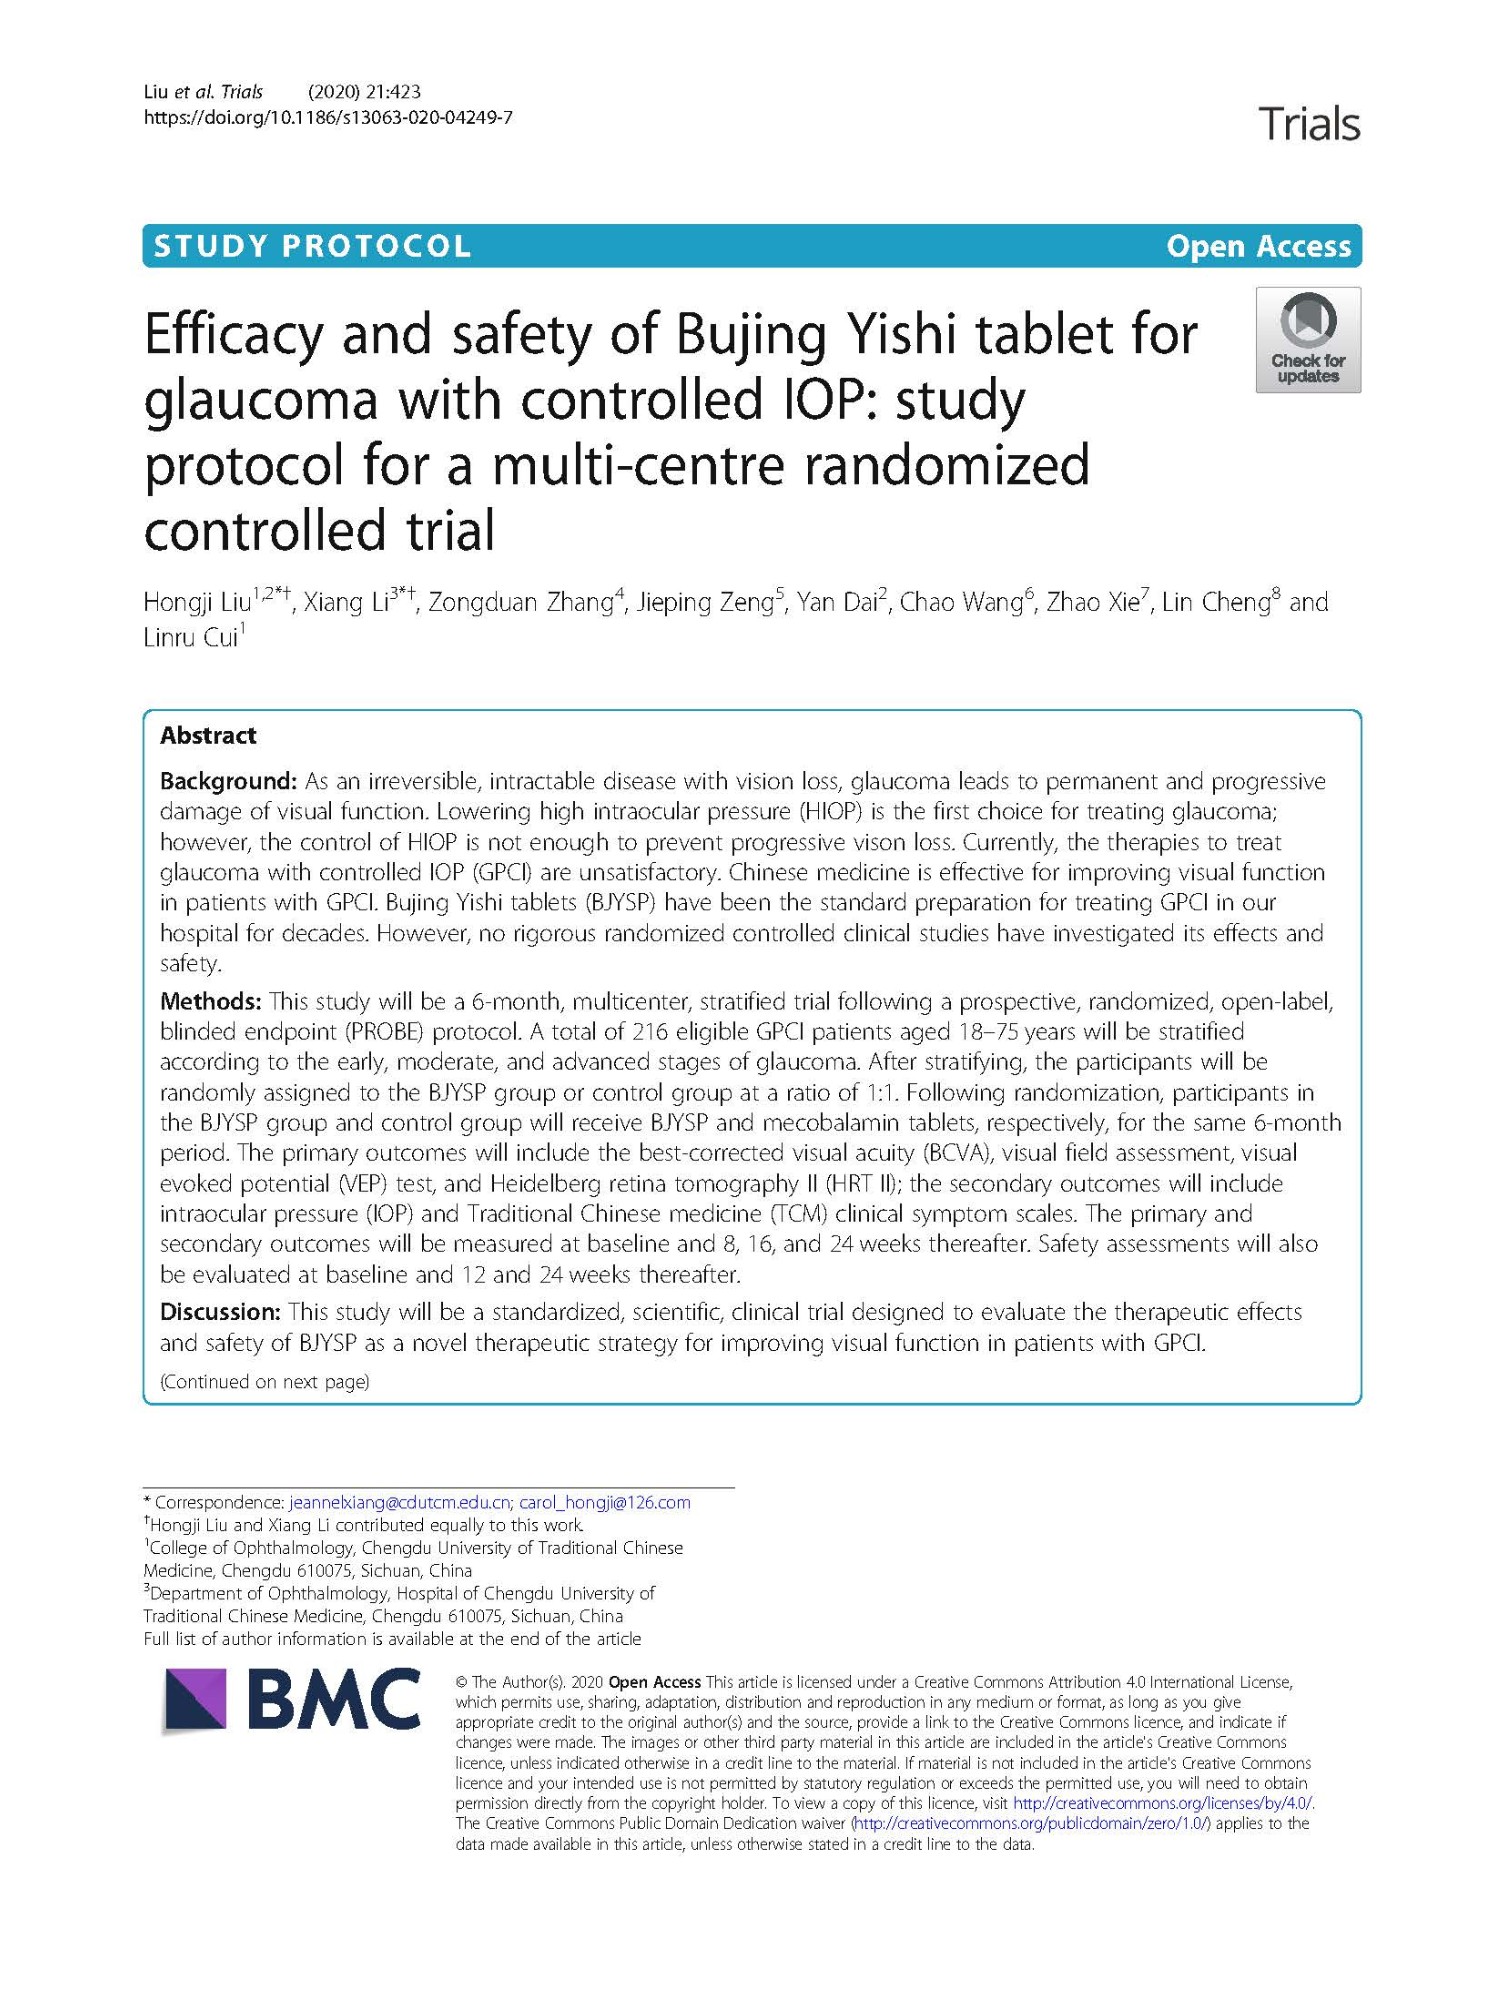 Efficacy and safety of Bujing Yishi tablet for glaucoma with controlled IOP- study protocol for a multi-centre randomized controlled trial